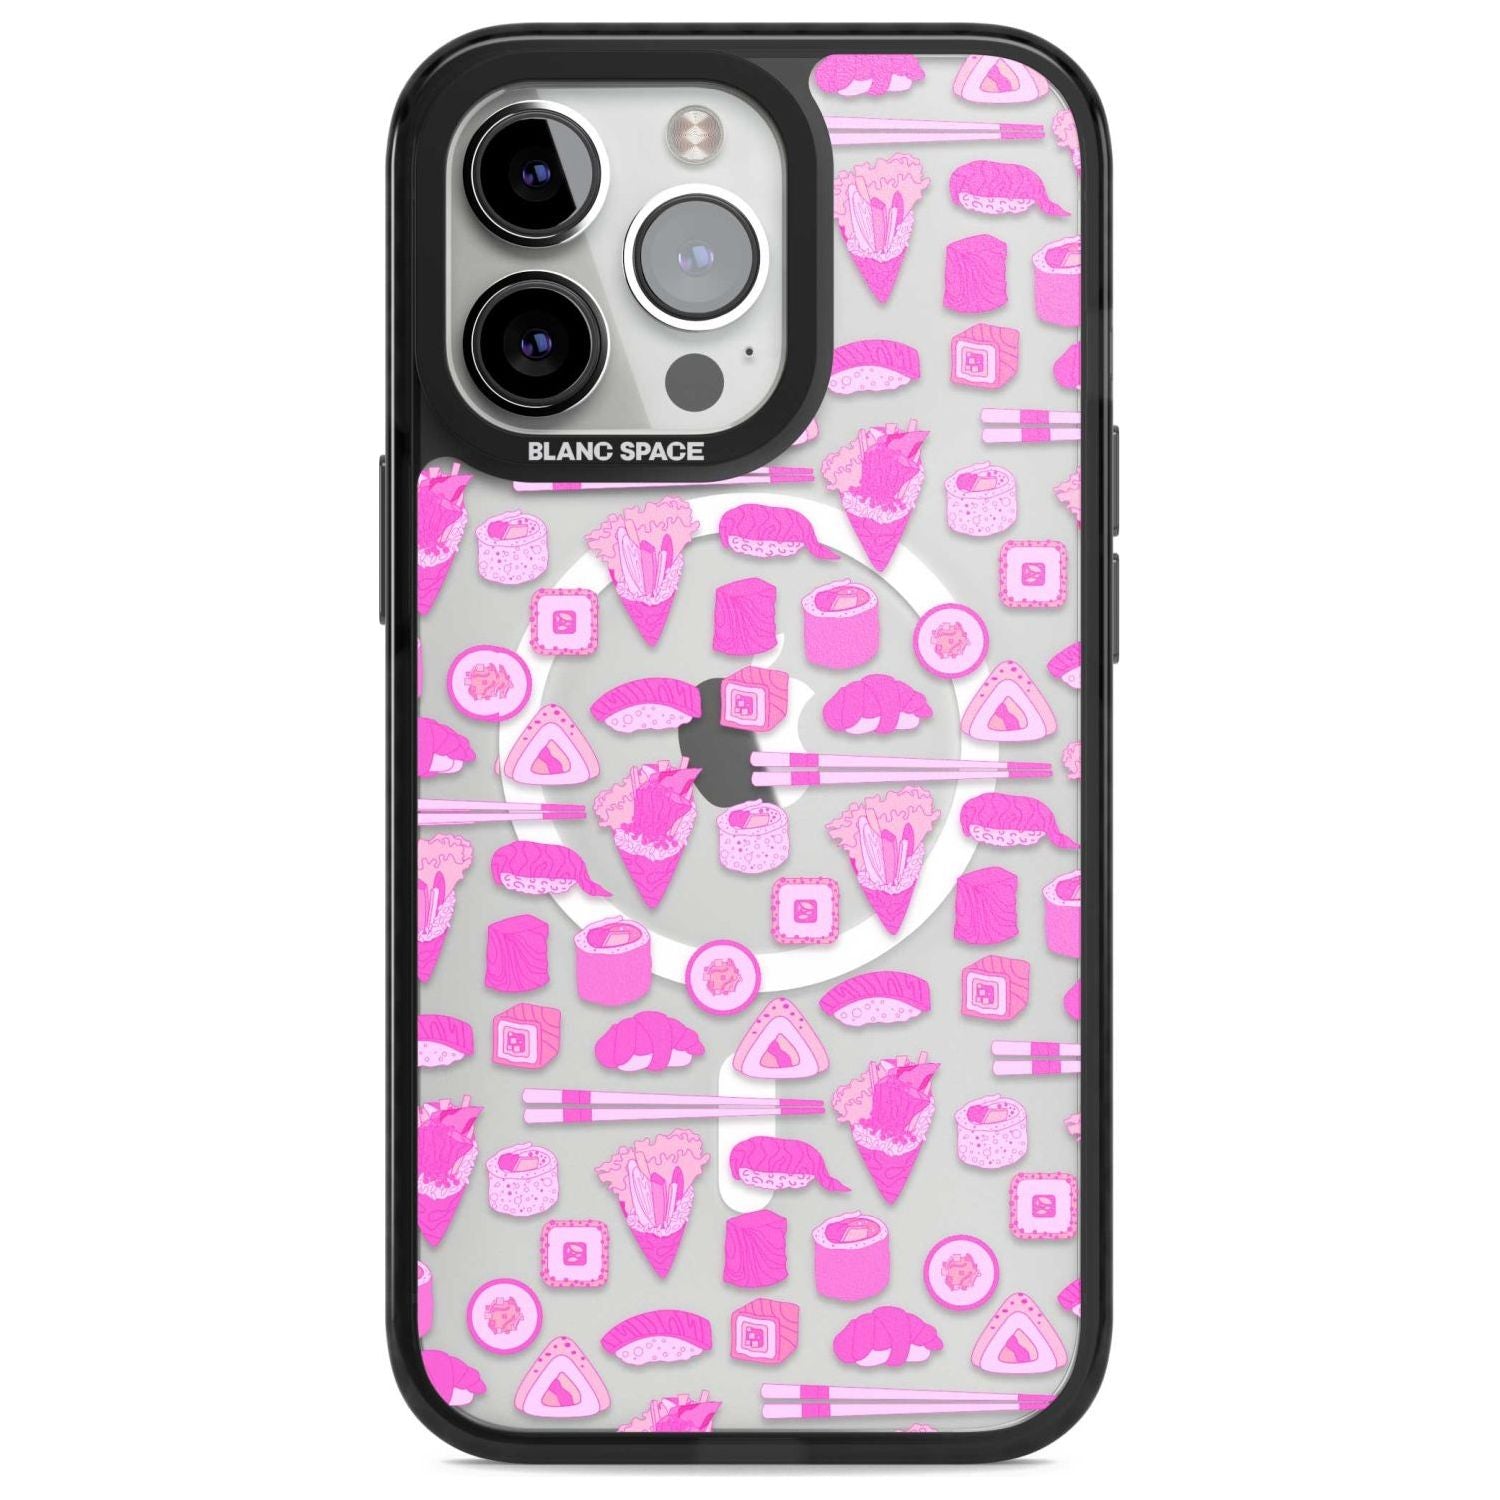 Bright Pink Sushi Pattern Phone Case iPhone 15 Pro Max / Magsafe Black Impact Case,iPhone 15 Pro / Magsafe Black Impact Case,iPhone 14 Pro Max / Magsafe Black Impact Case,iPhone 14 Pro / Magsafe Black Impact Case,iPhone 13 Pro / Magsafe Black Impact Case Blanc Space